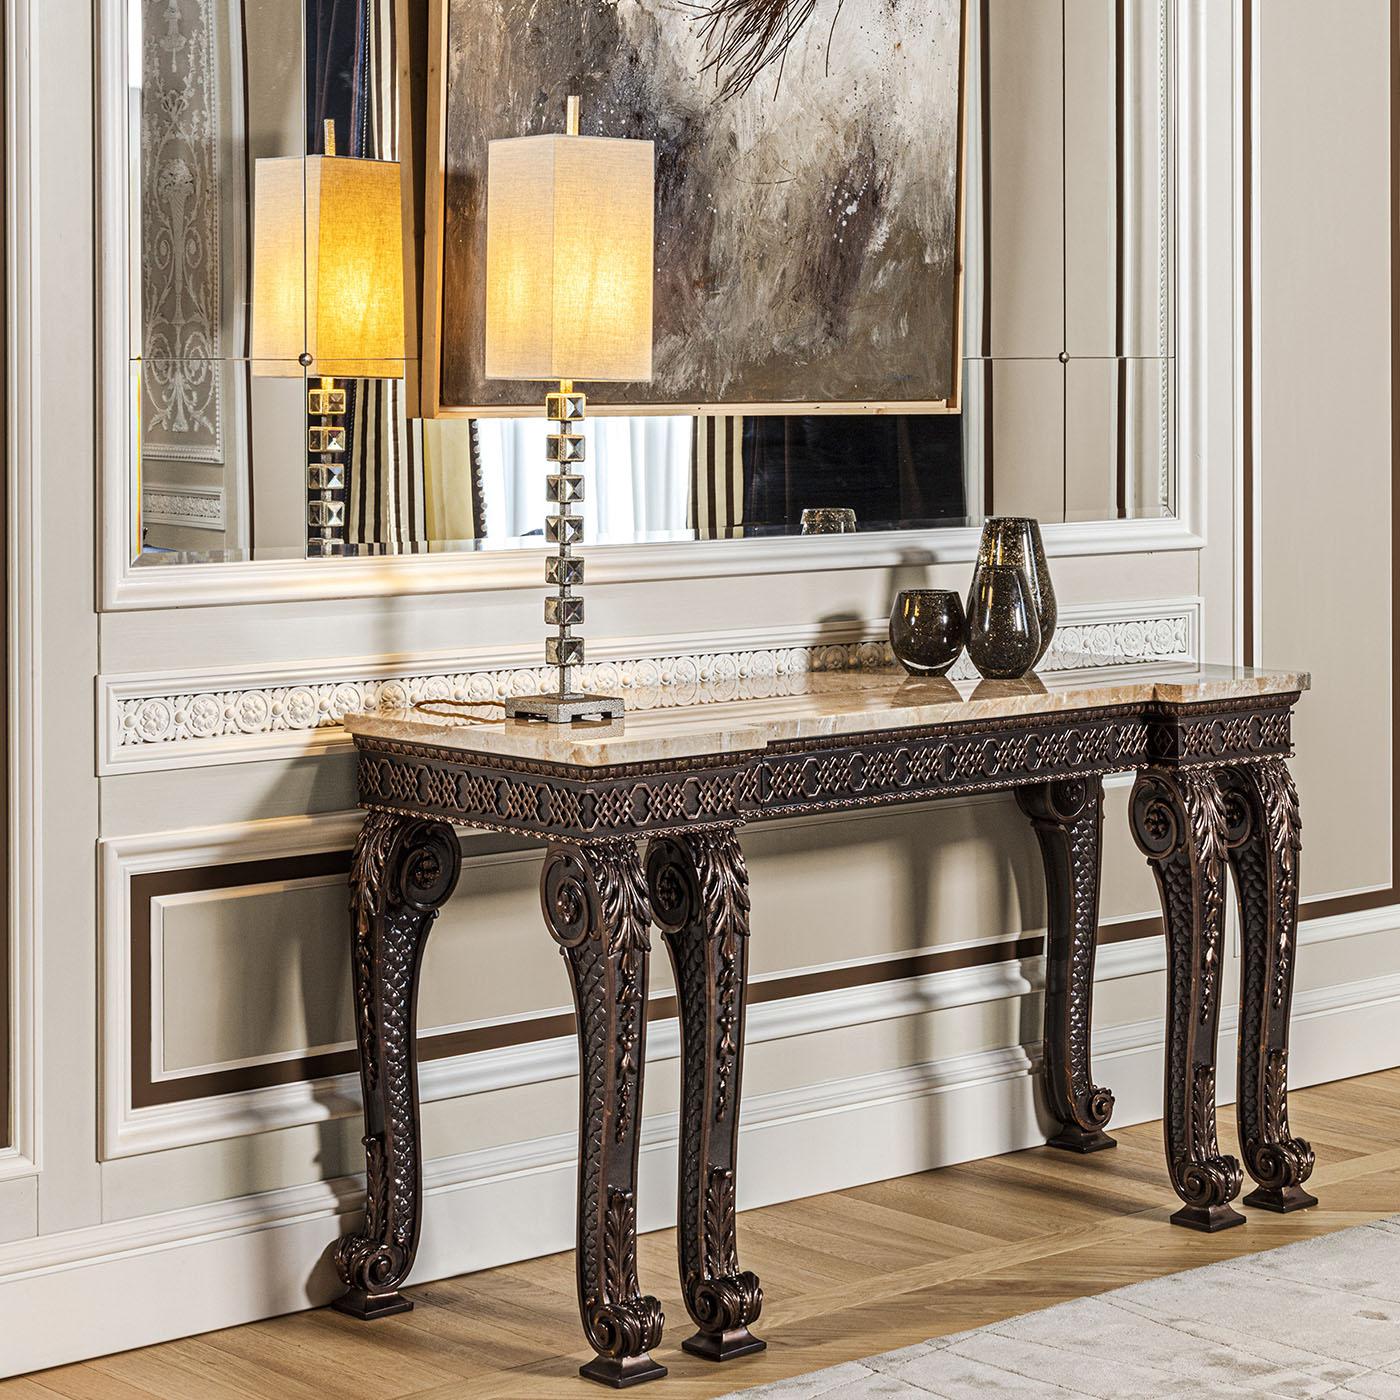 Hand-carved console with marble top and special bronze finishing.